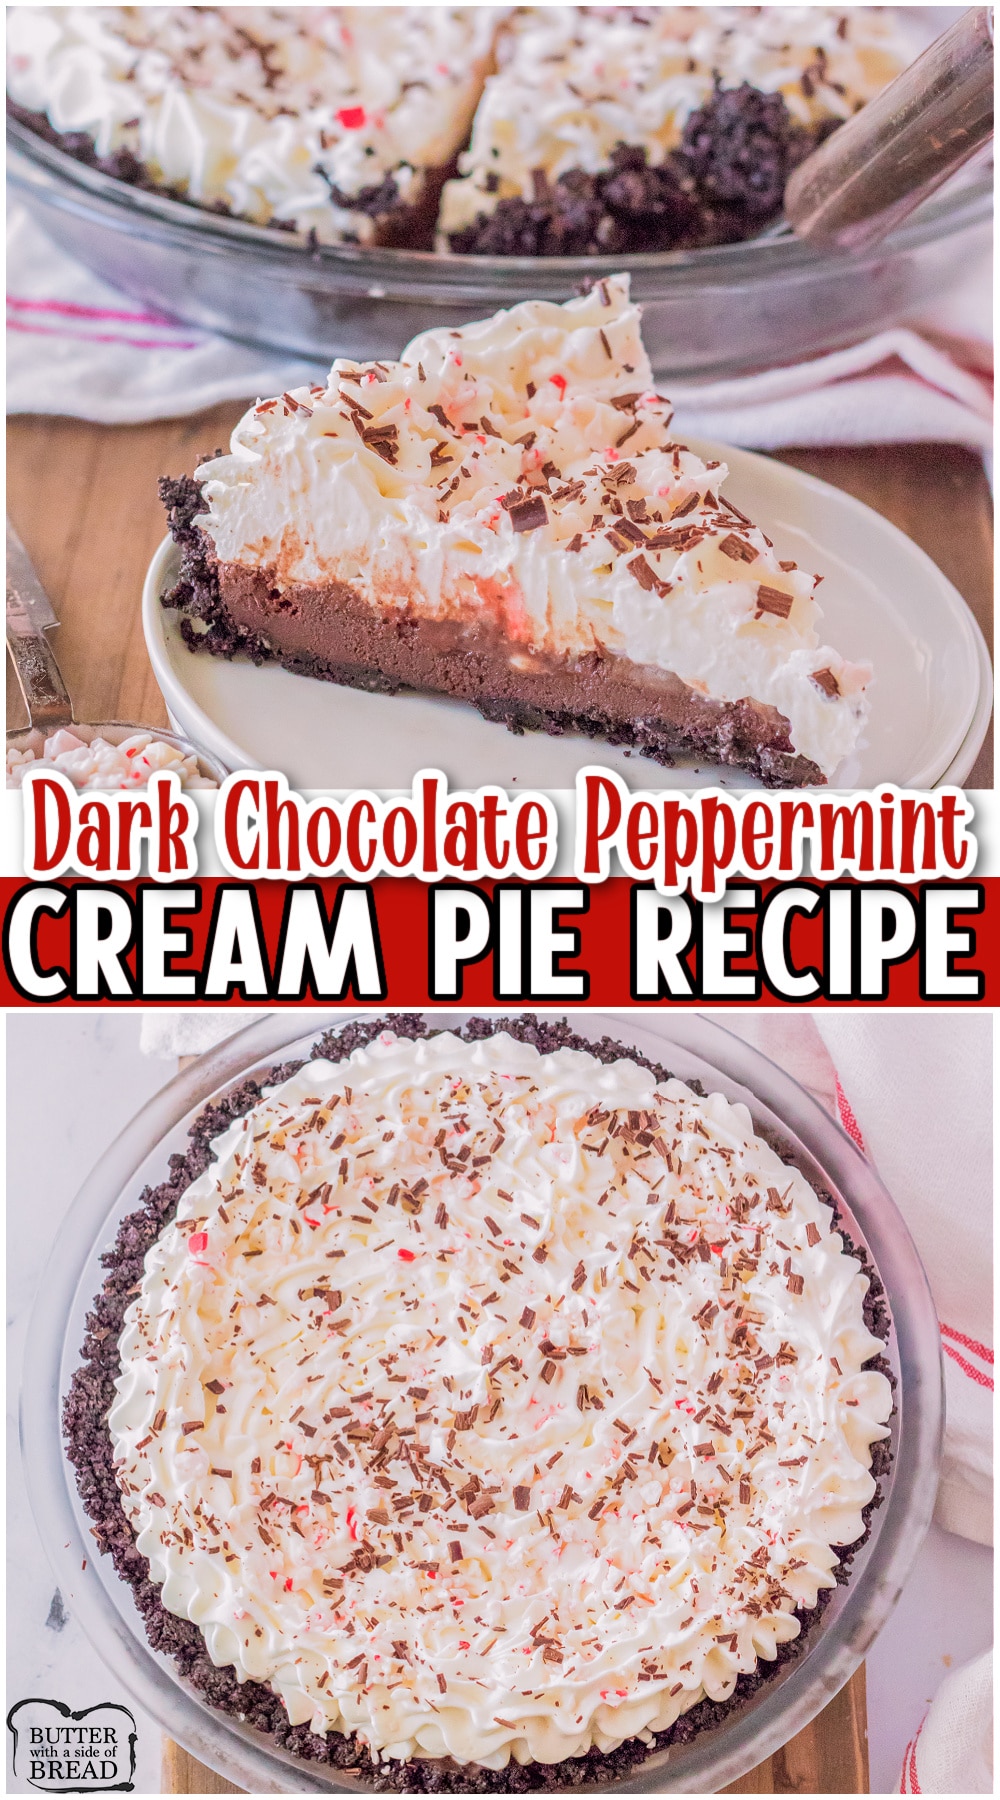 Dark Chocolate Peppermint Cream Pie made with an Oreo cookie crust and filled with a creamy dark chocolate filling & topped with sweet cream! Rich and chocolatey homemade cream pie recipe with great peppermint flavor! 